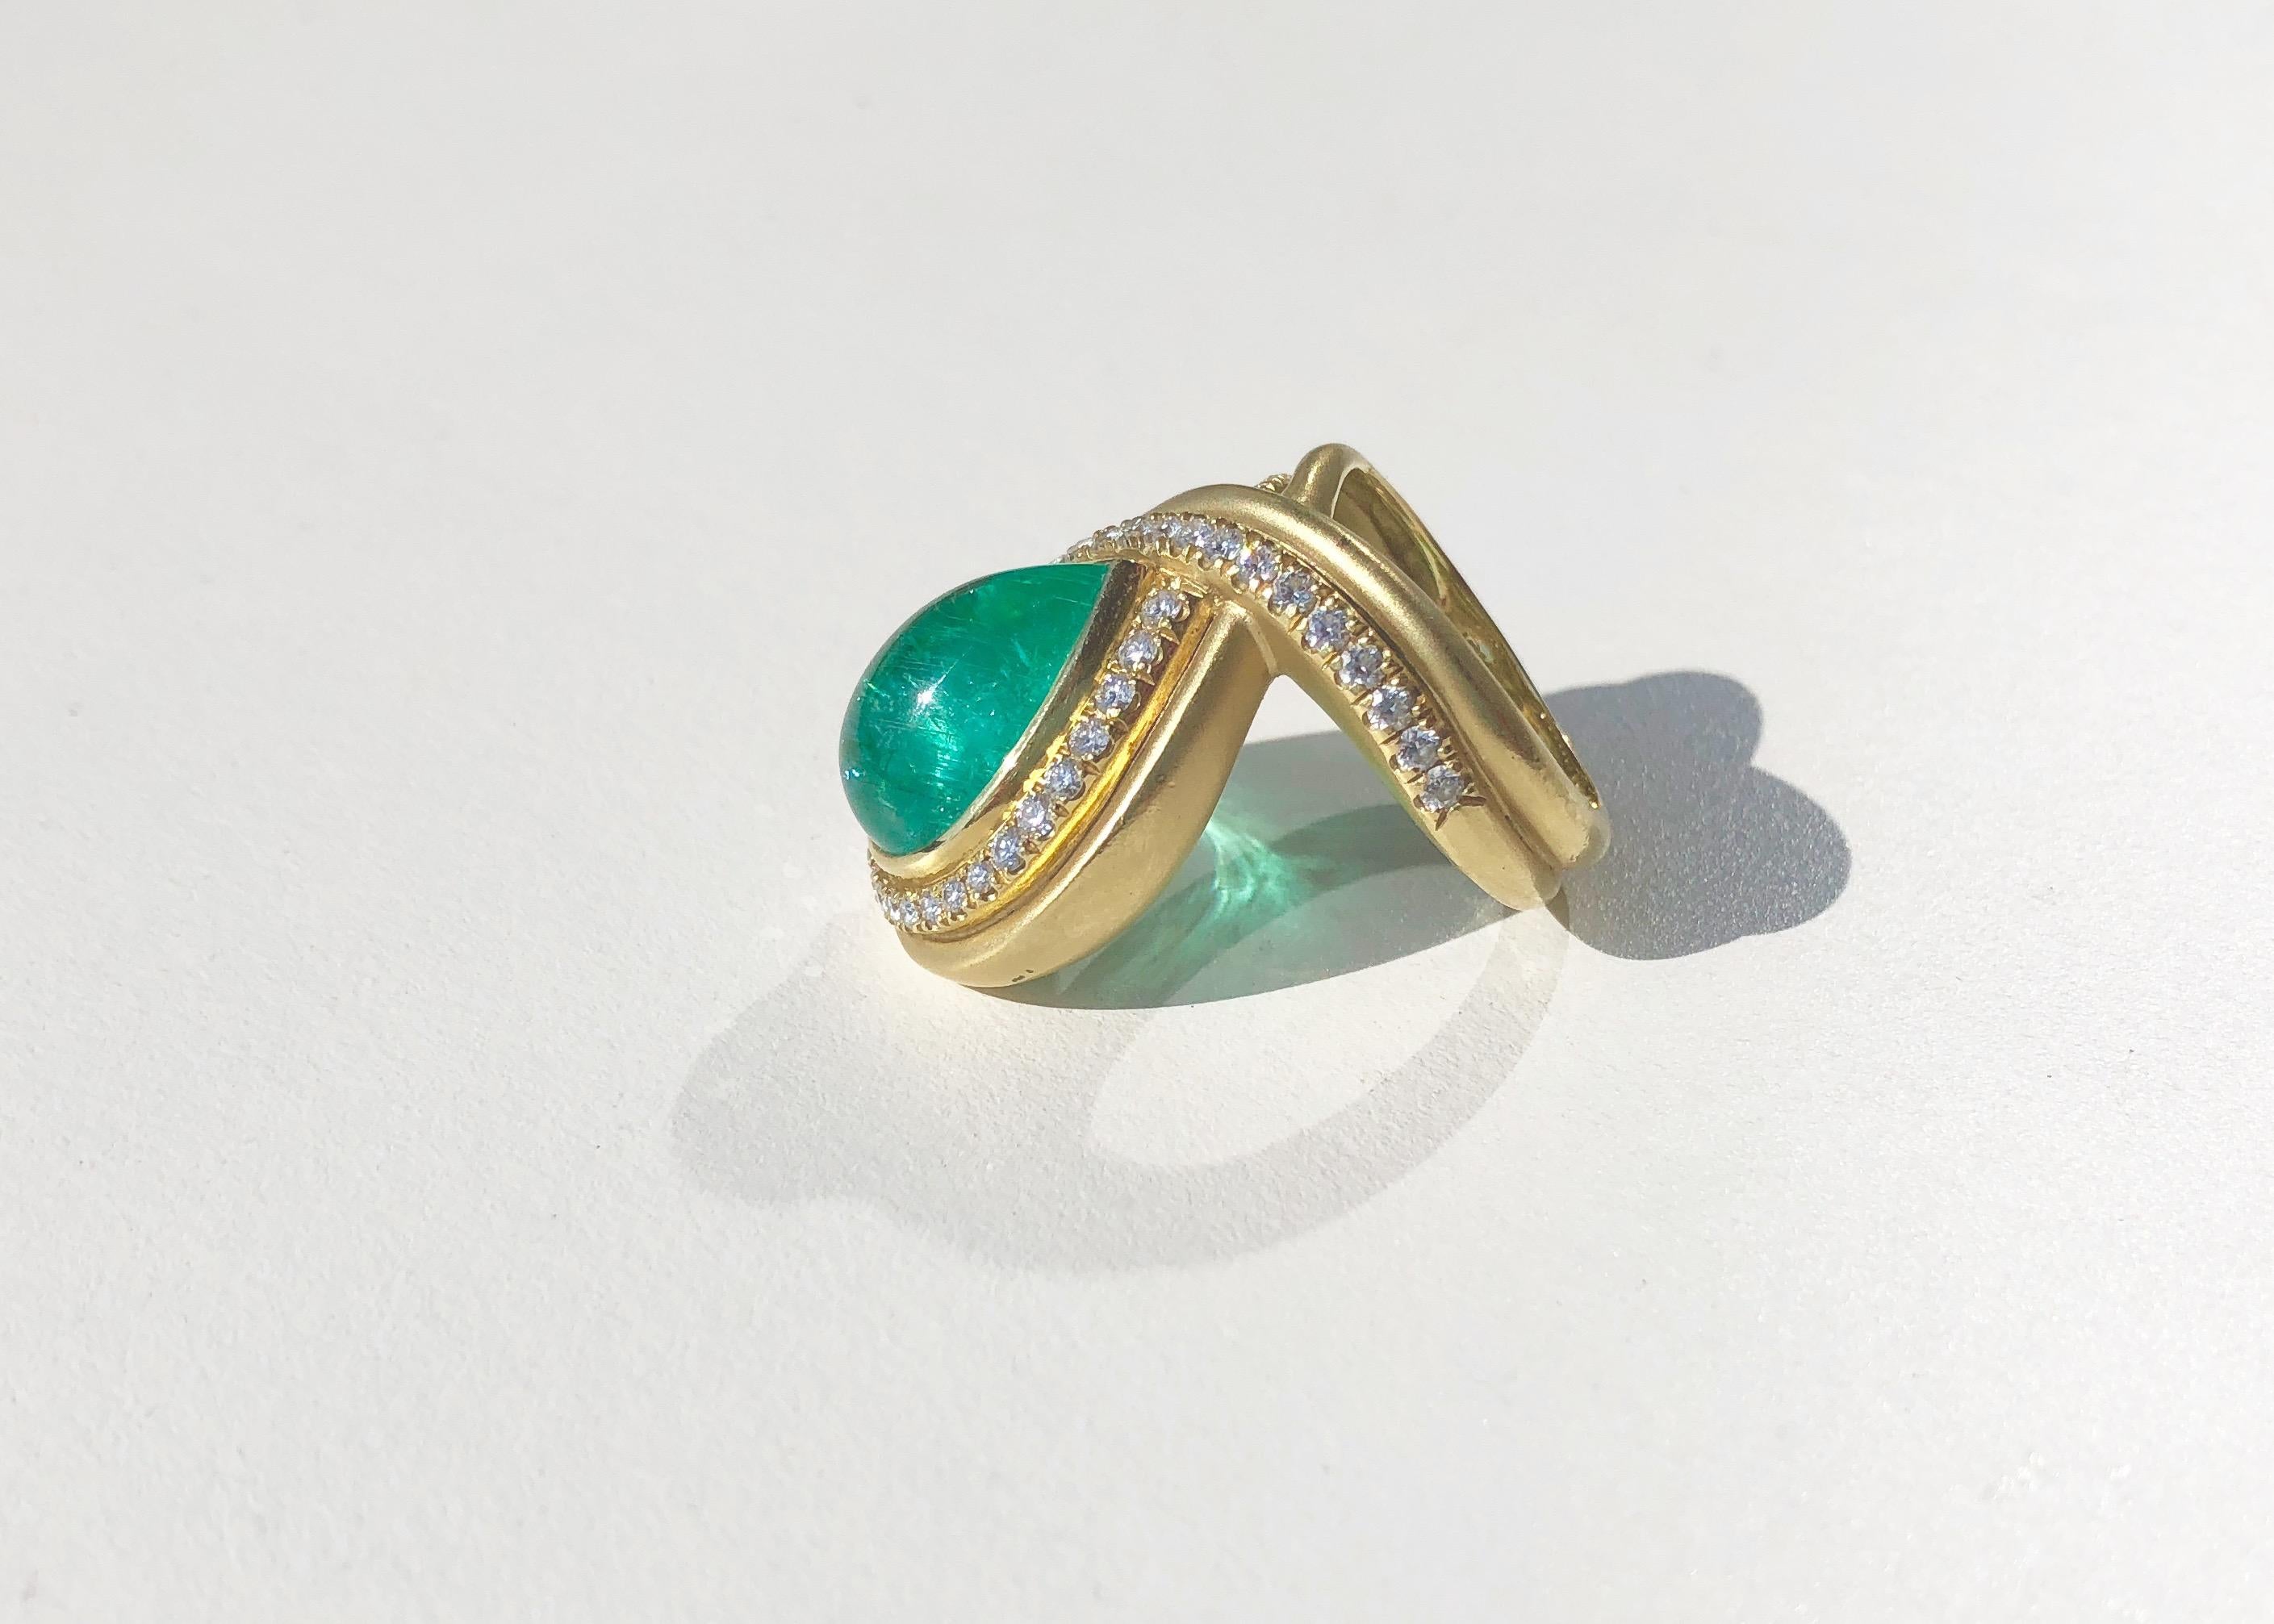 This show-stopper is a Paraiba Tourmaline (Mozambique) surrounded by a ribbon of Diamonds set into an 18kt Gold Band reminiscent of creations from the Mughal Empire. (Size 7.5)
